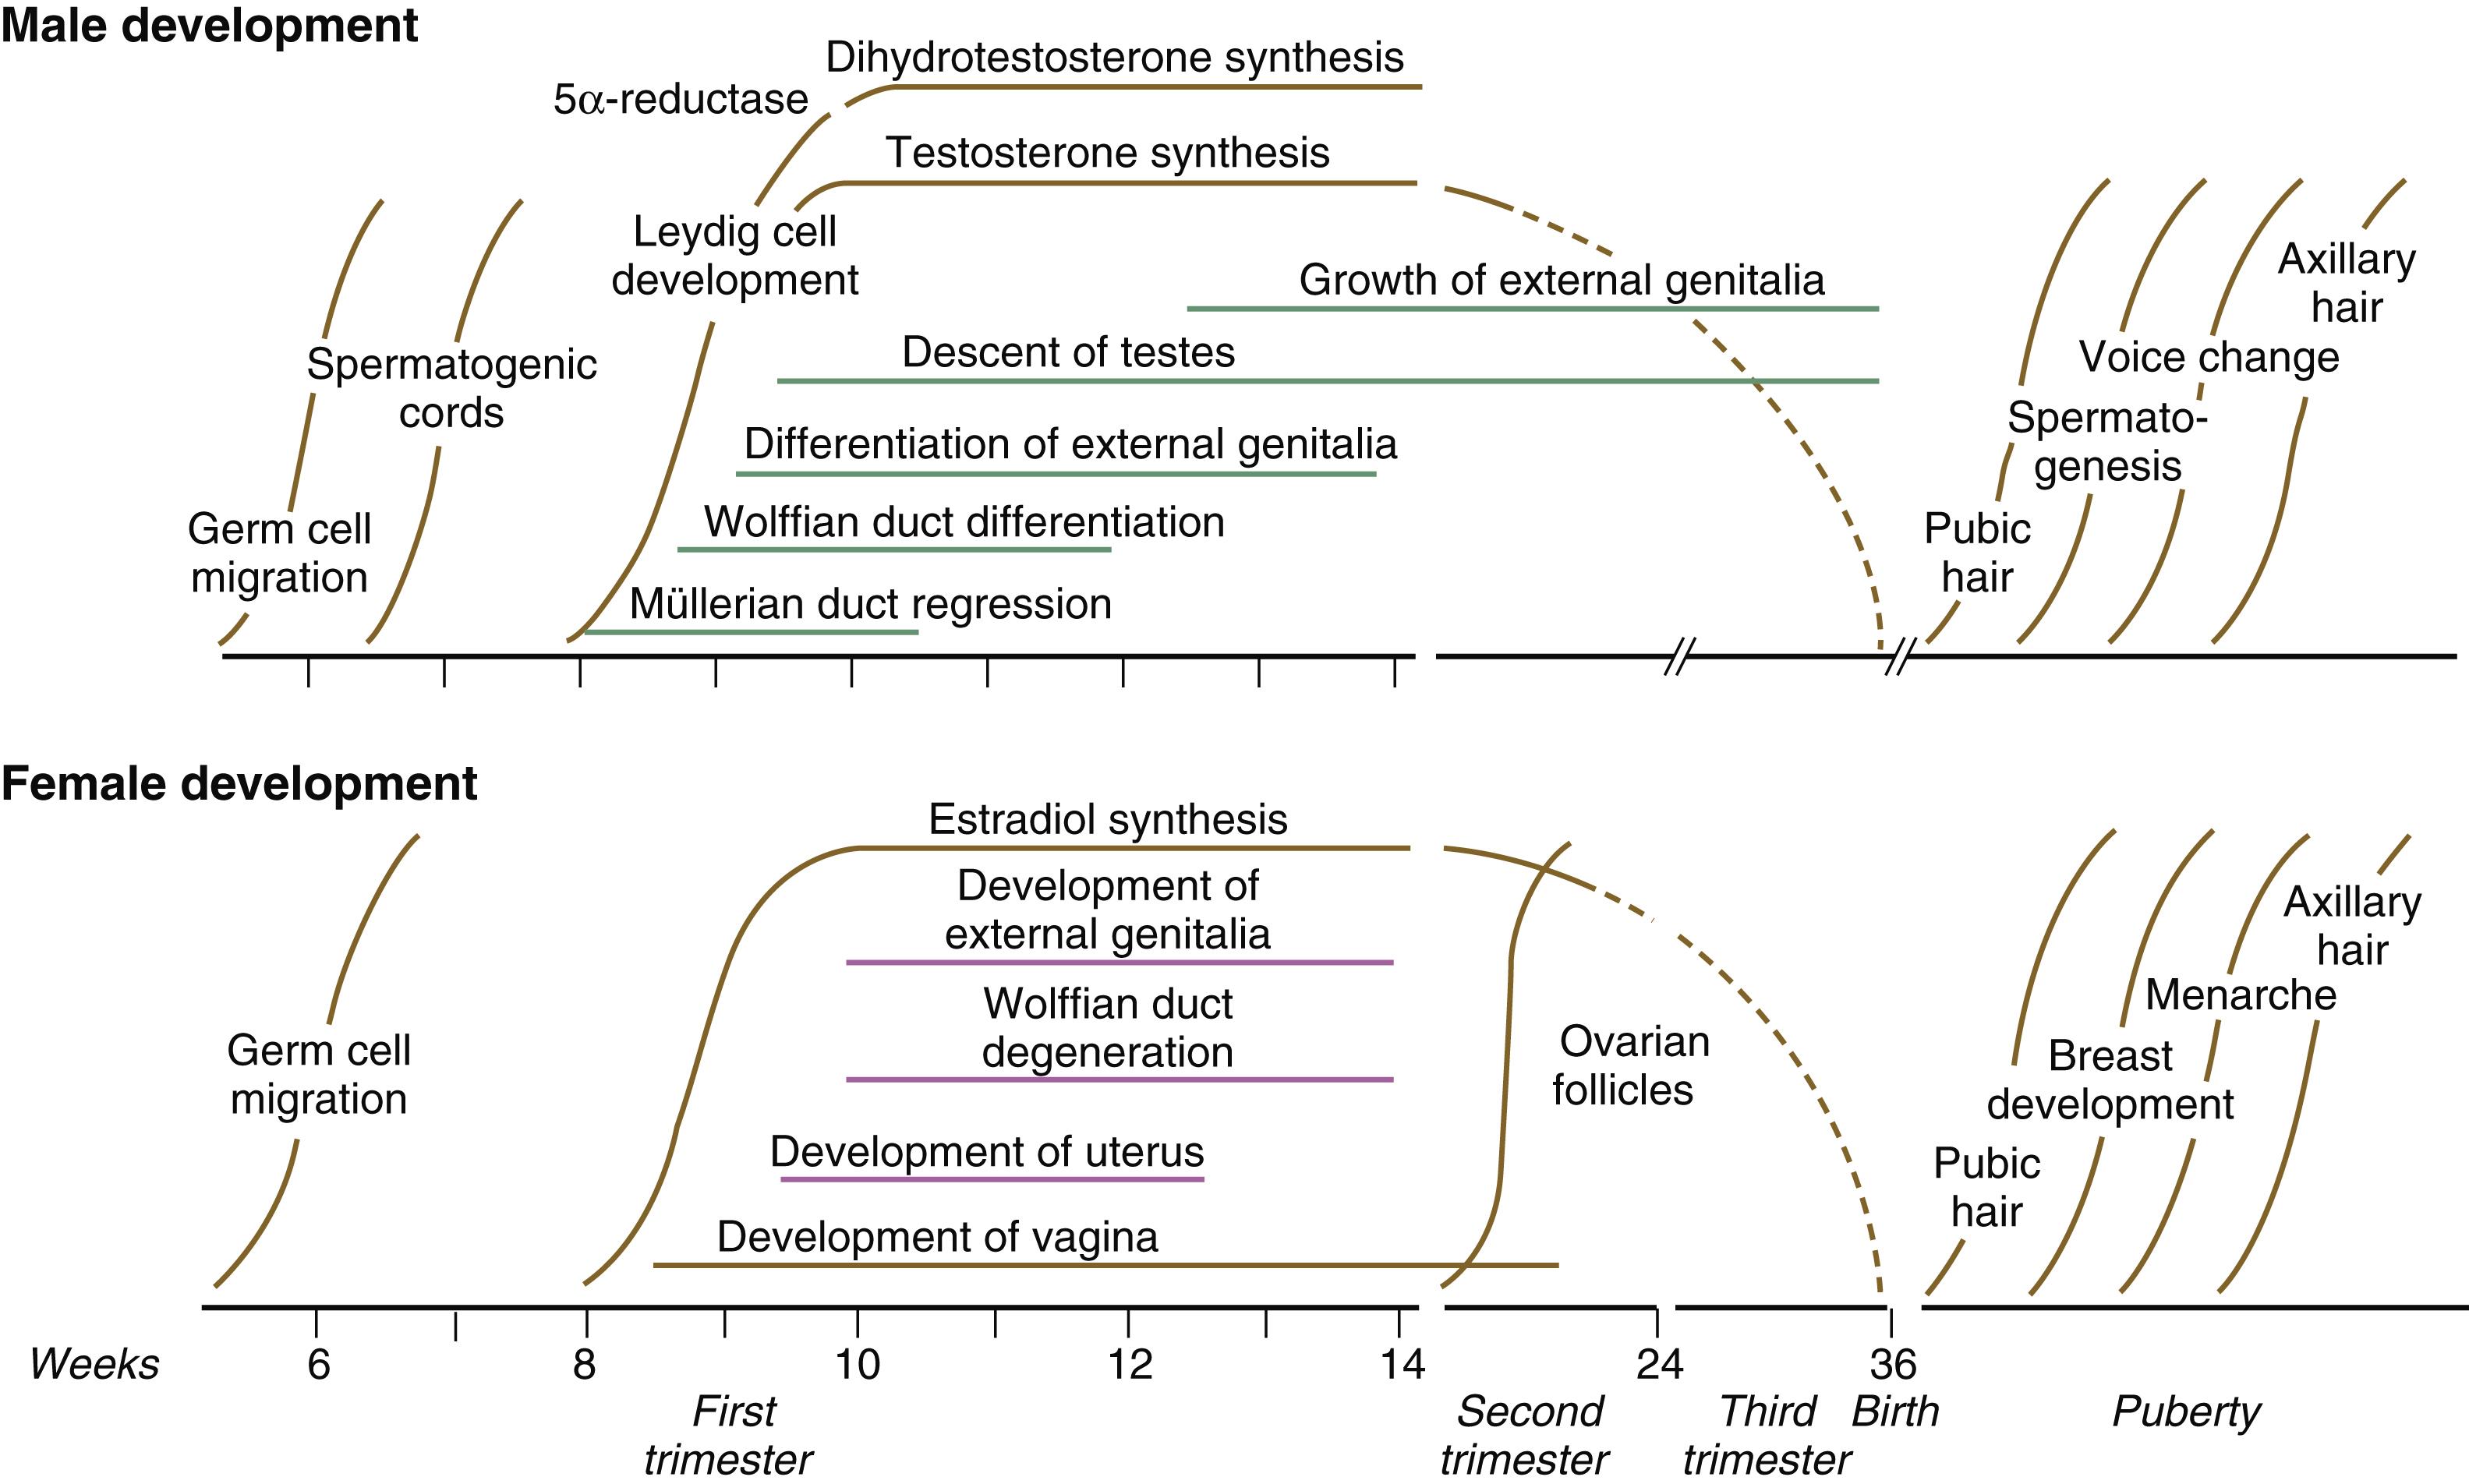 Fig. 16.23, Major events in the sexual differentiation of male and female human embryos.